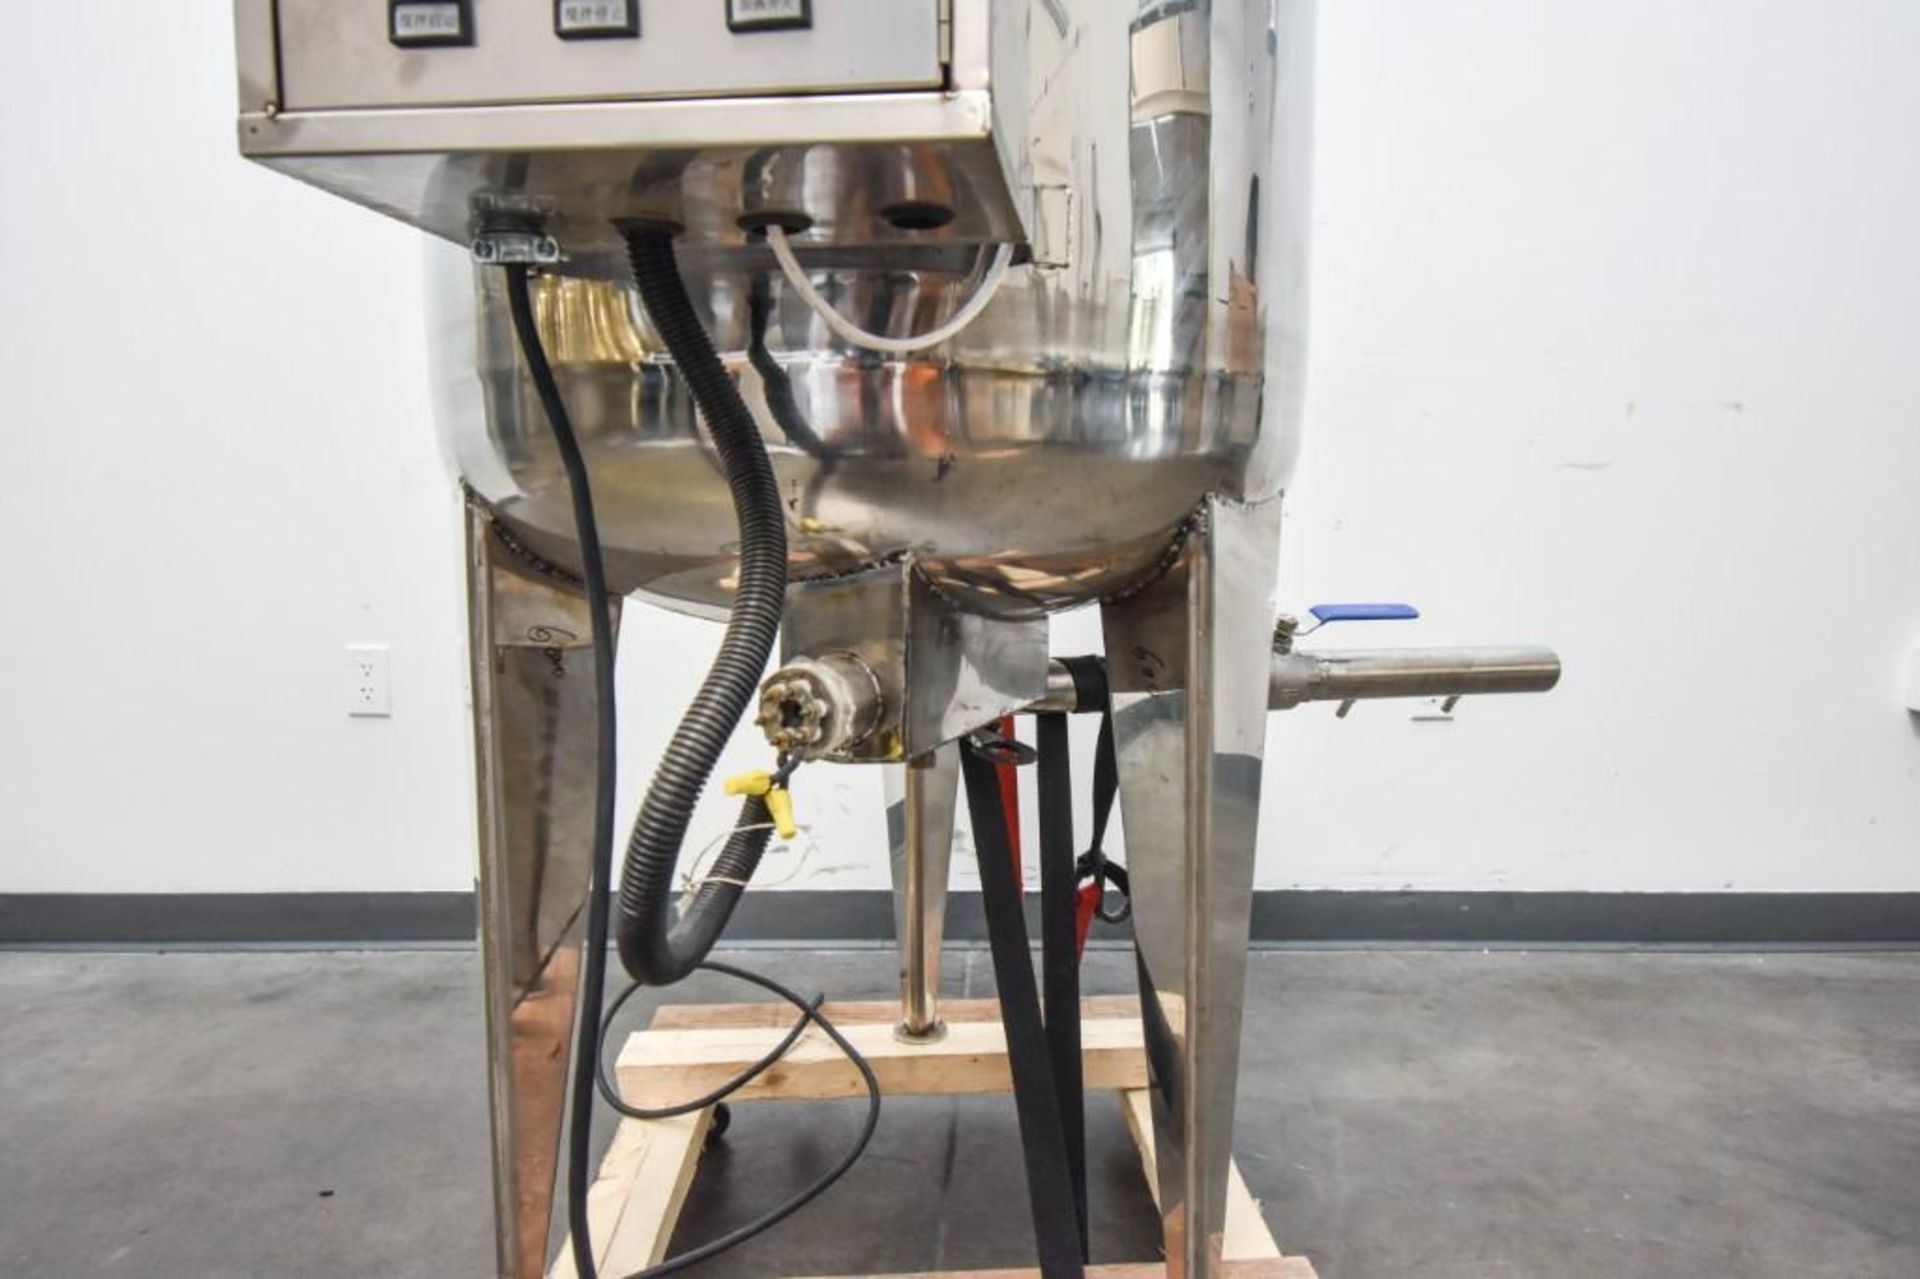 Dual Head Liquid Filling/ Capping Machine with Vibratory Cap Feeder and Mixing Tank - Image 17 of 27